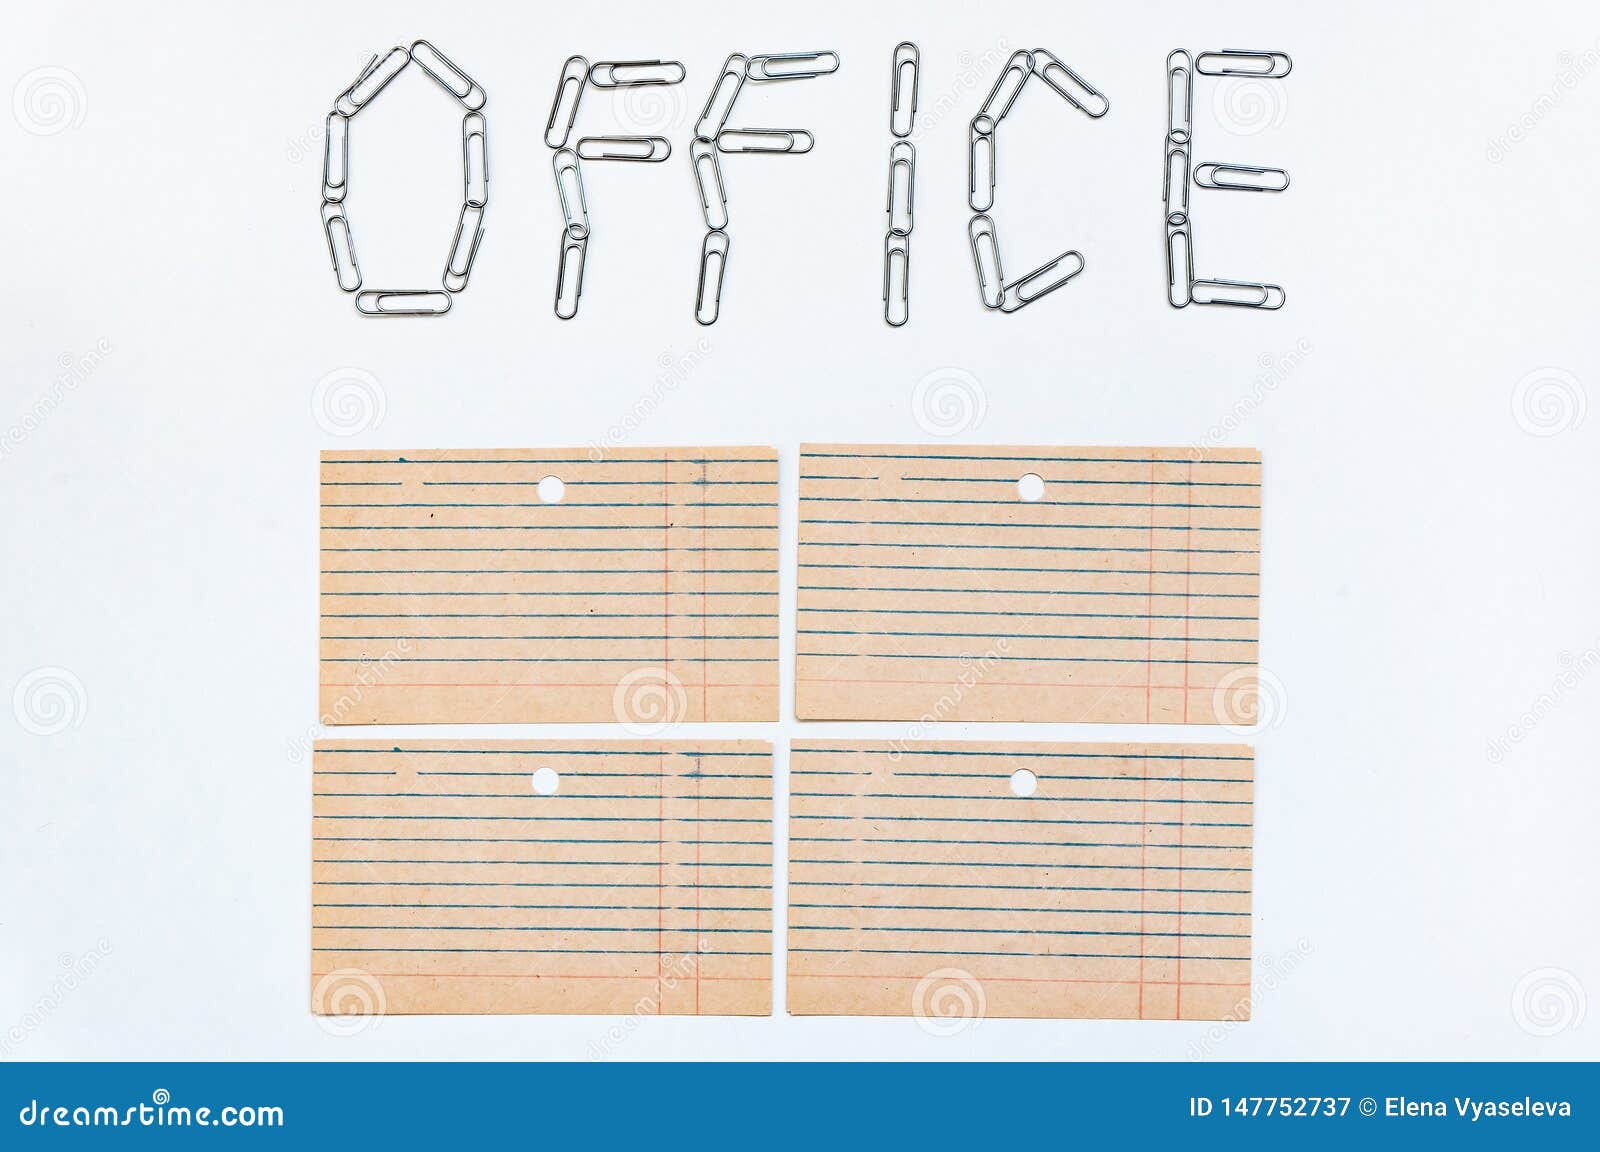 Office Object The Word Office Faded On A White Background With